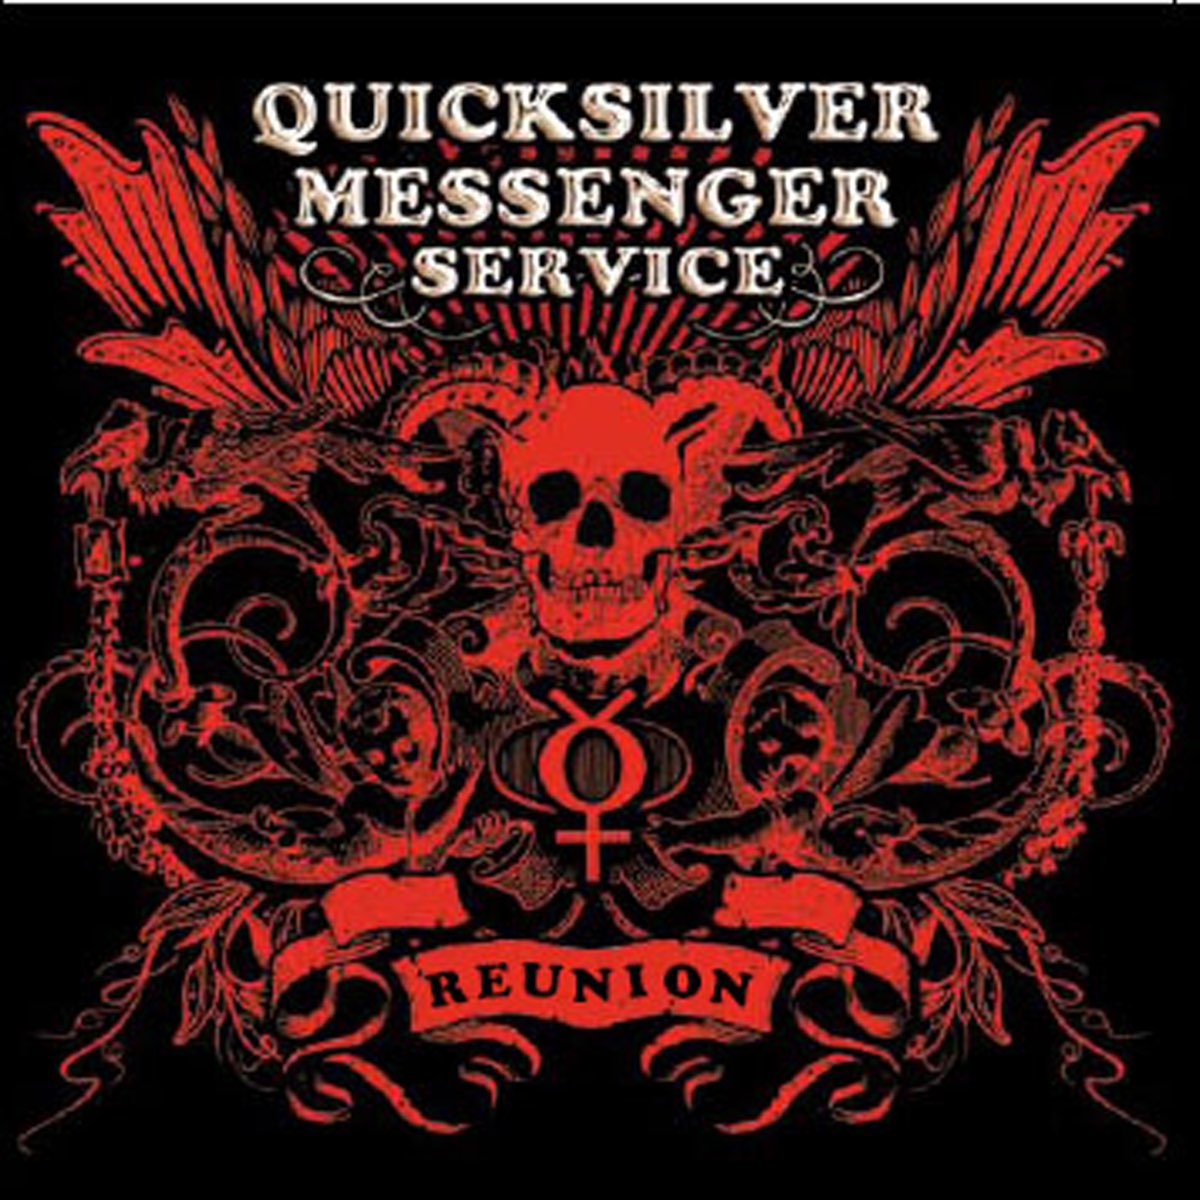 Quicksilver messenger. Quicksilver Messenger service. Quicksilver Messenger service logo. Quicksilver Messenger service - Quicksilver Messenger service (1968). Quicksilver Messenger service - who do you Love Suite, who do you Love (Part 1).